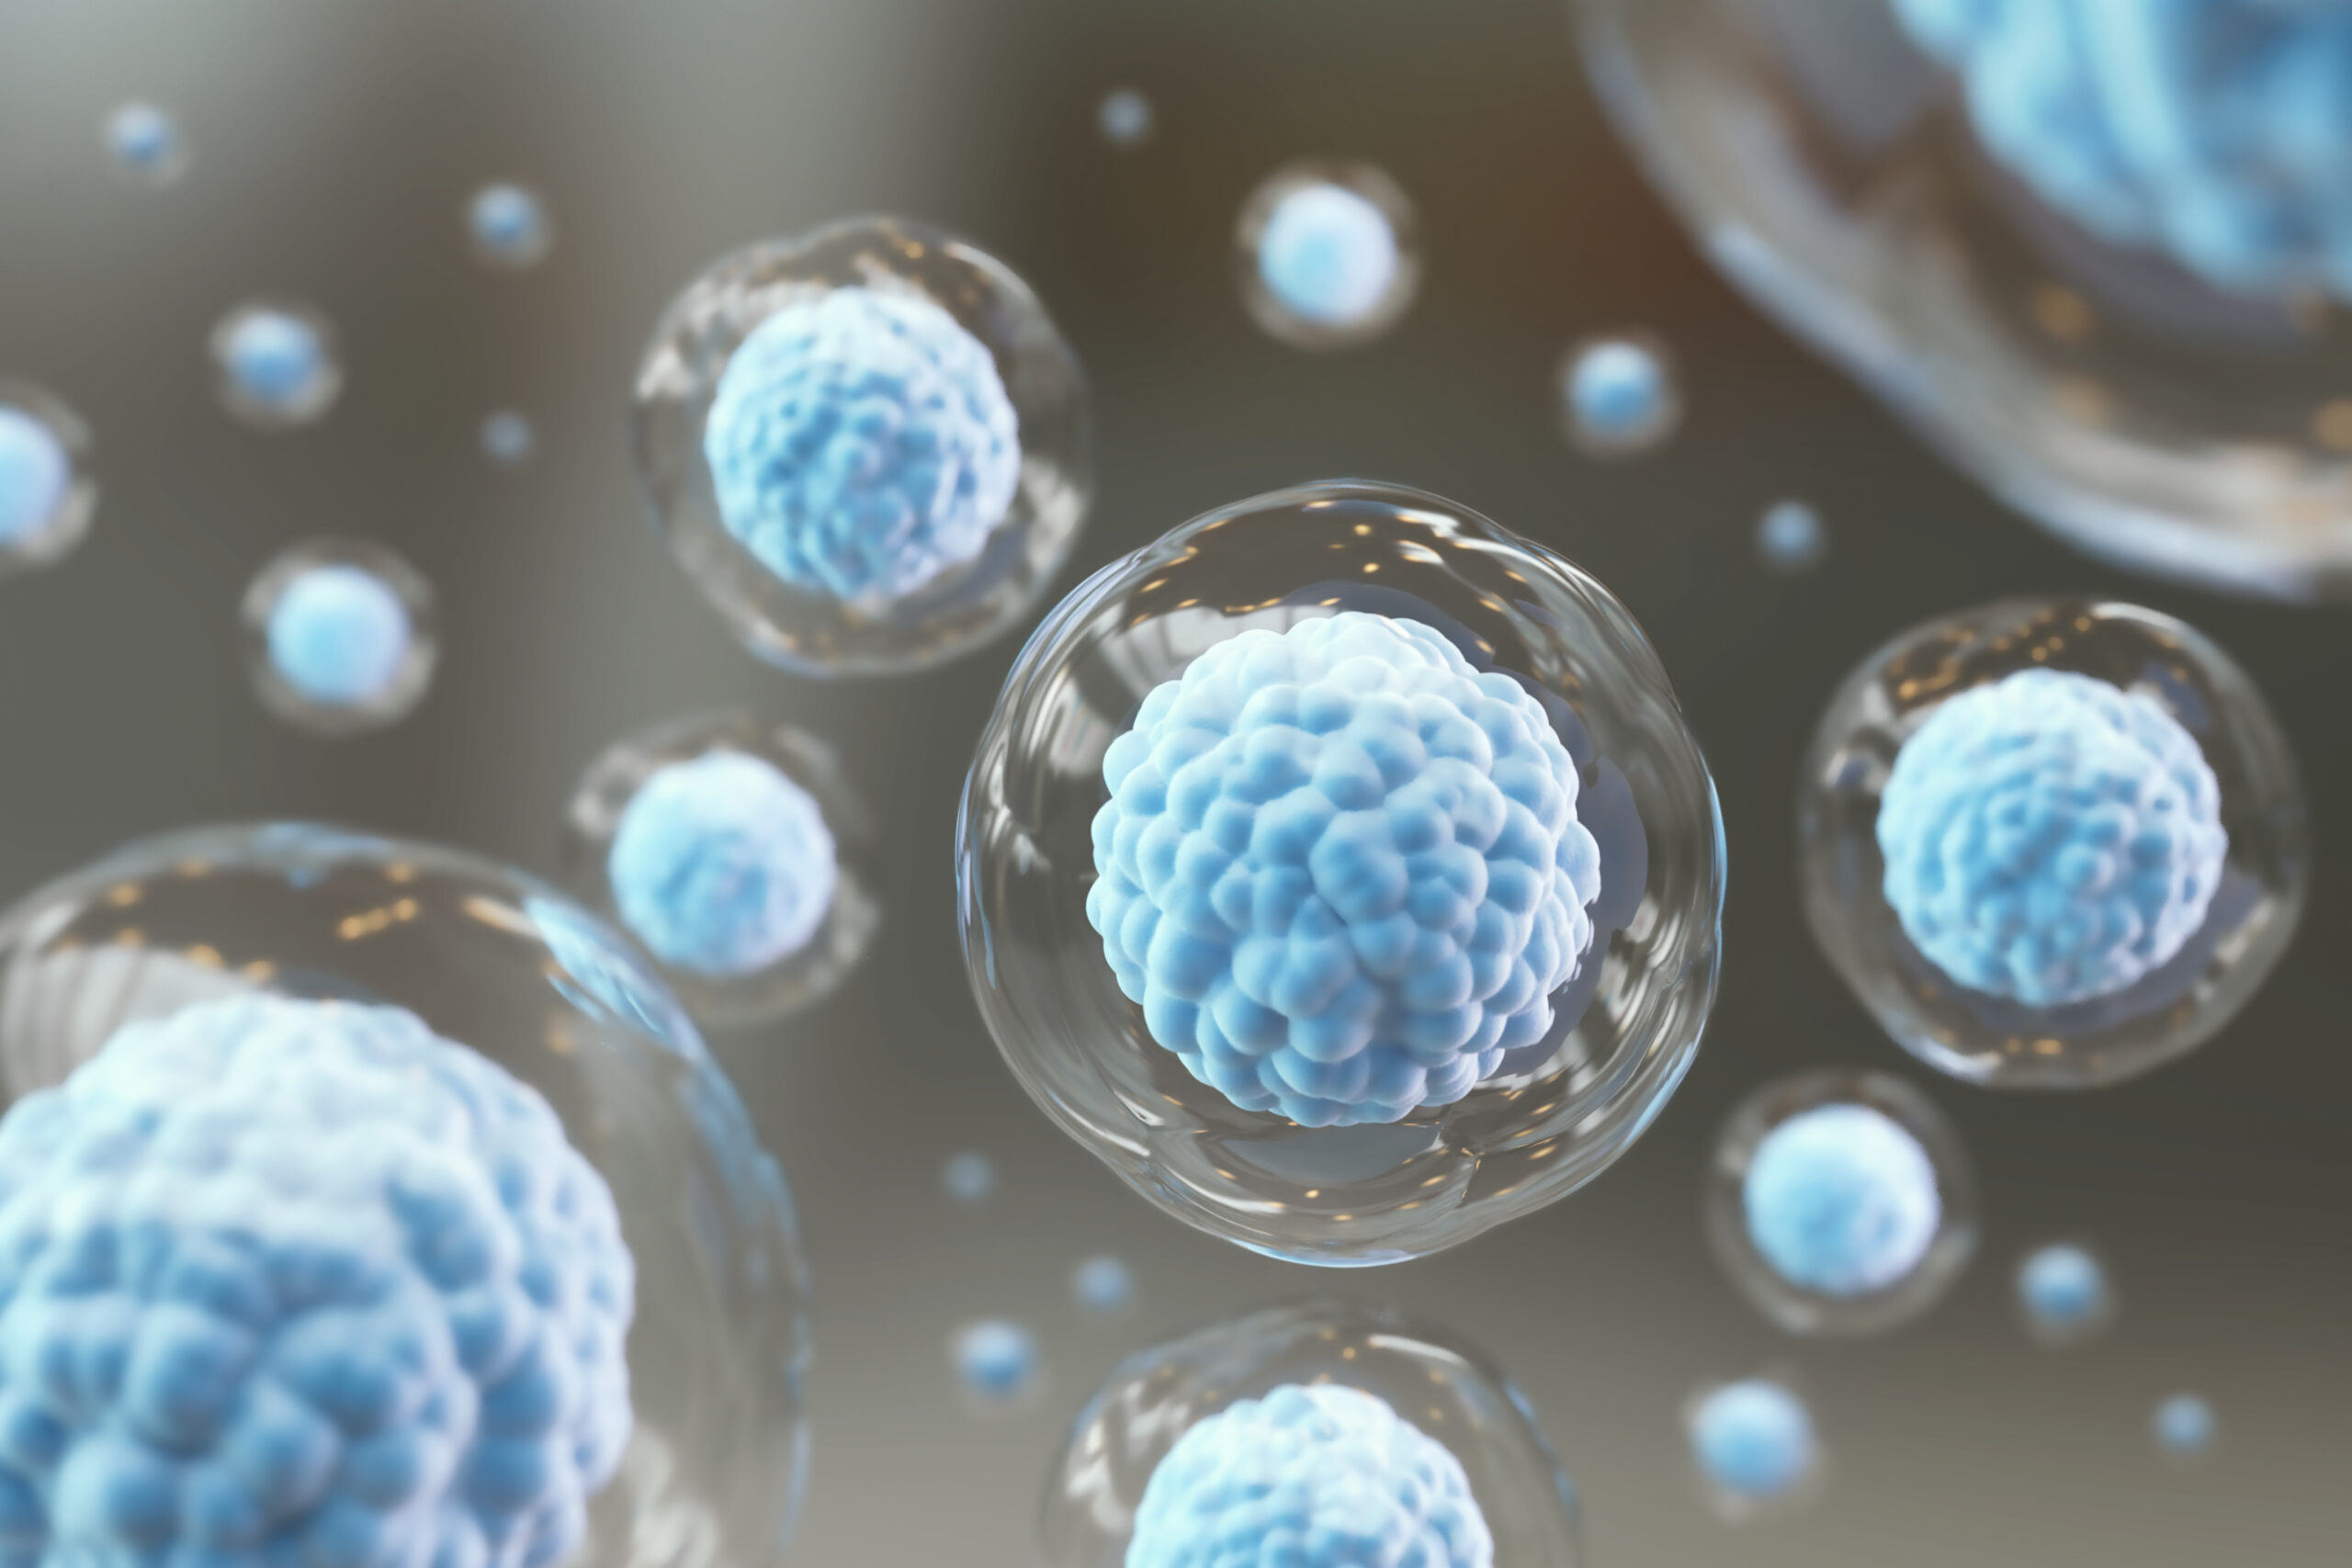 Development Of New Stem Cell Type May Lead To Advances In Regenerative Medicine